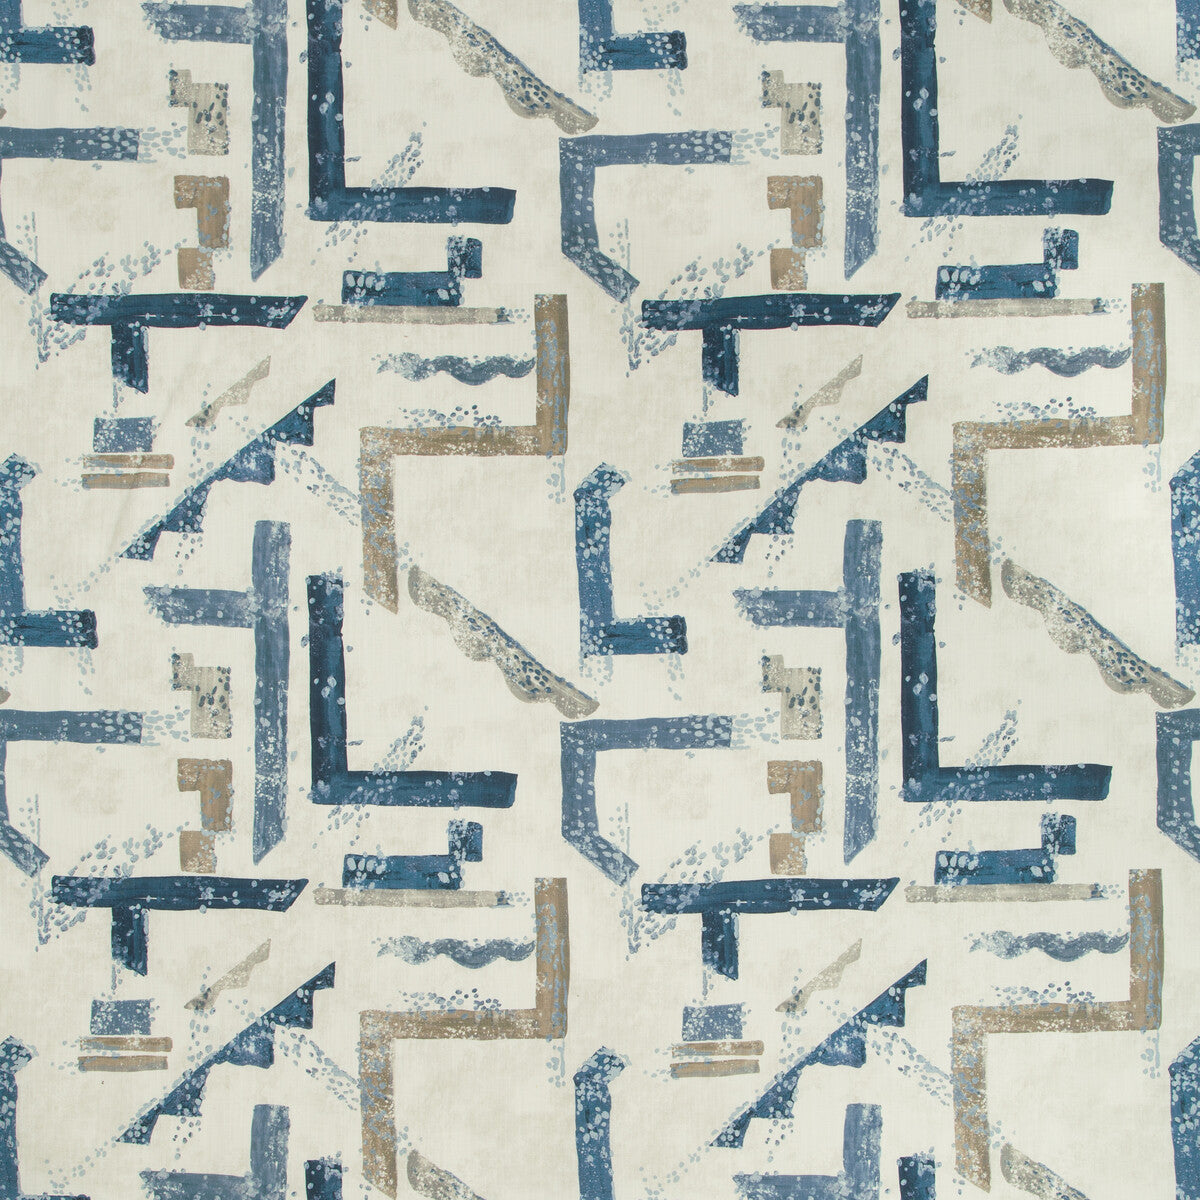 Dessau fabric in chambray color - pattern DESSAU.5.0 - by Kravet Basics in the Nate Berkus Well-Traveled collection